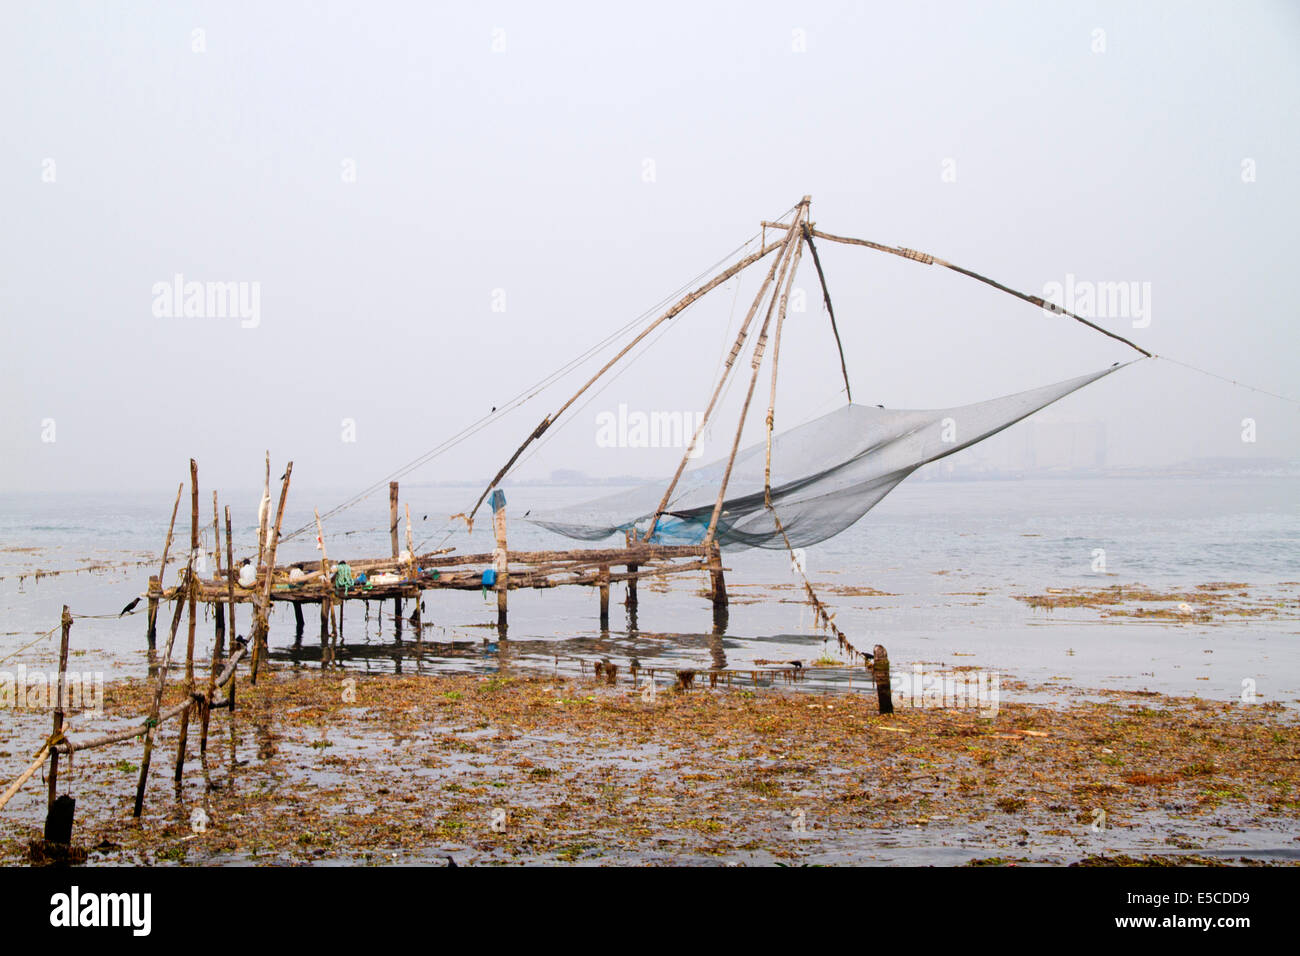 Chinese fishing net used to dip fish from the ocean on the